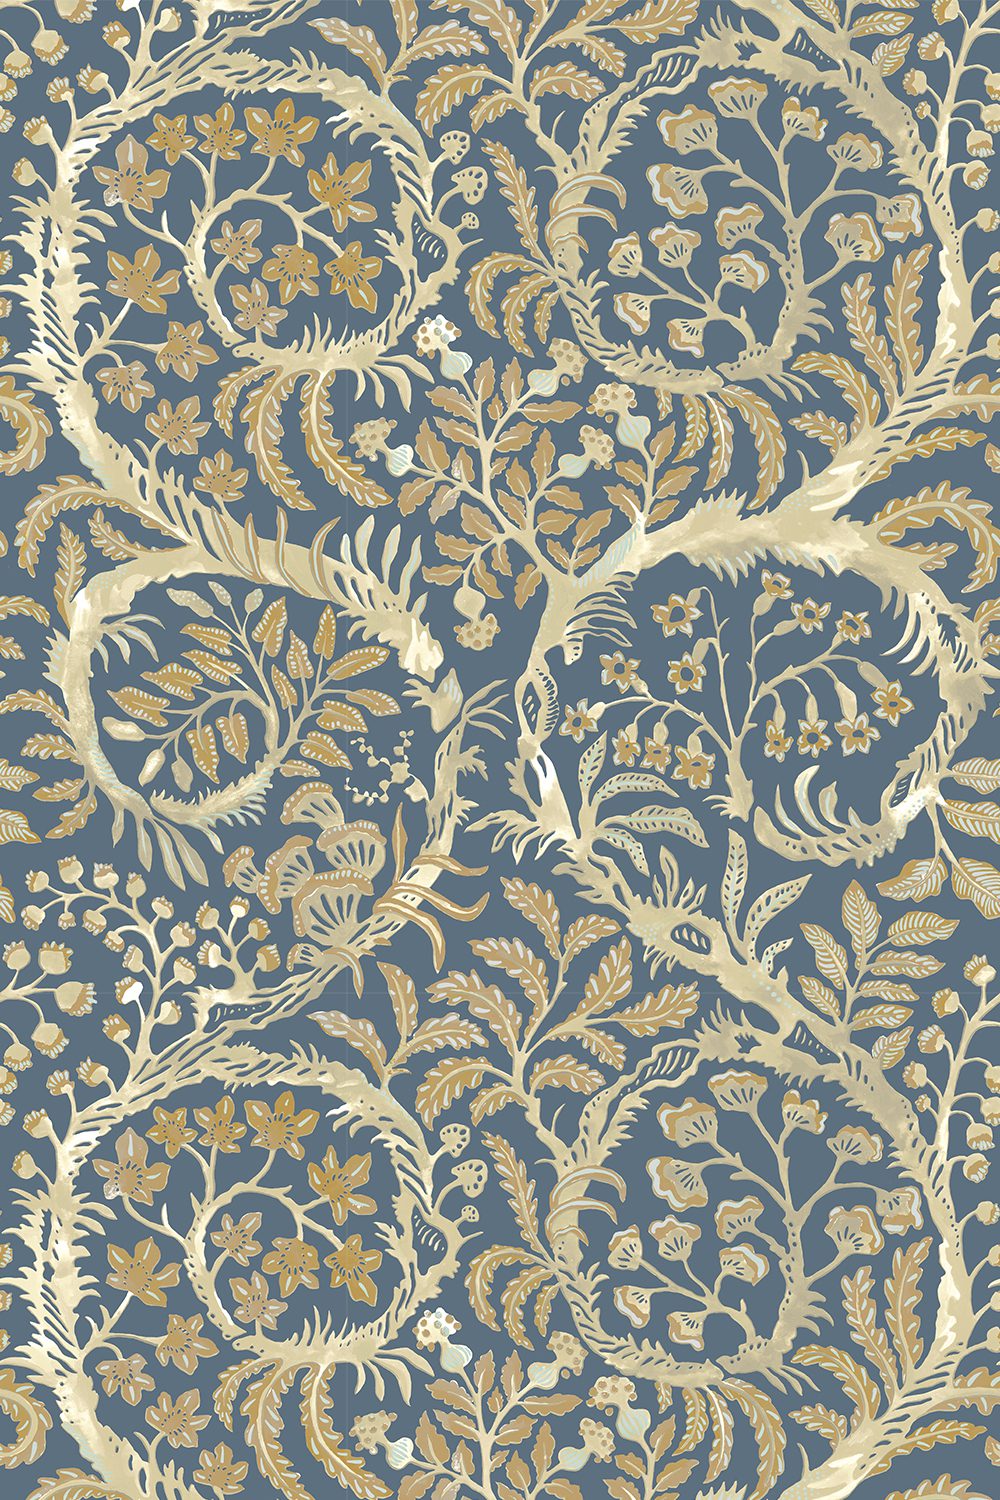 958 × 958px  Josephine-Munsey-wallpaper-butterrow-soft-blue-and-brown-traditional-trailing-botanical-print-folliage-shell-shapes